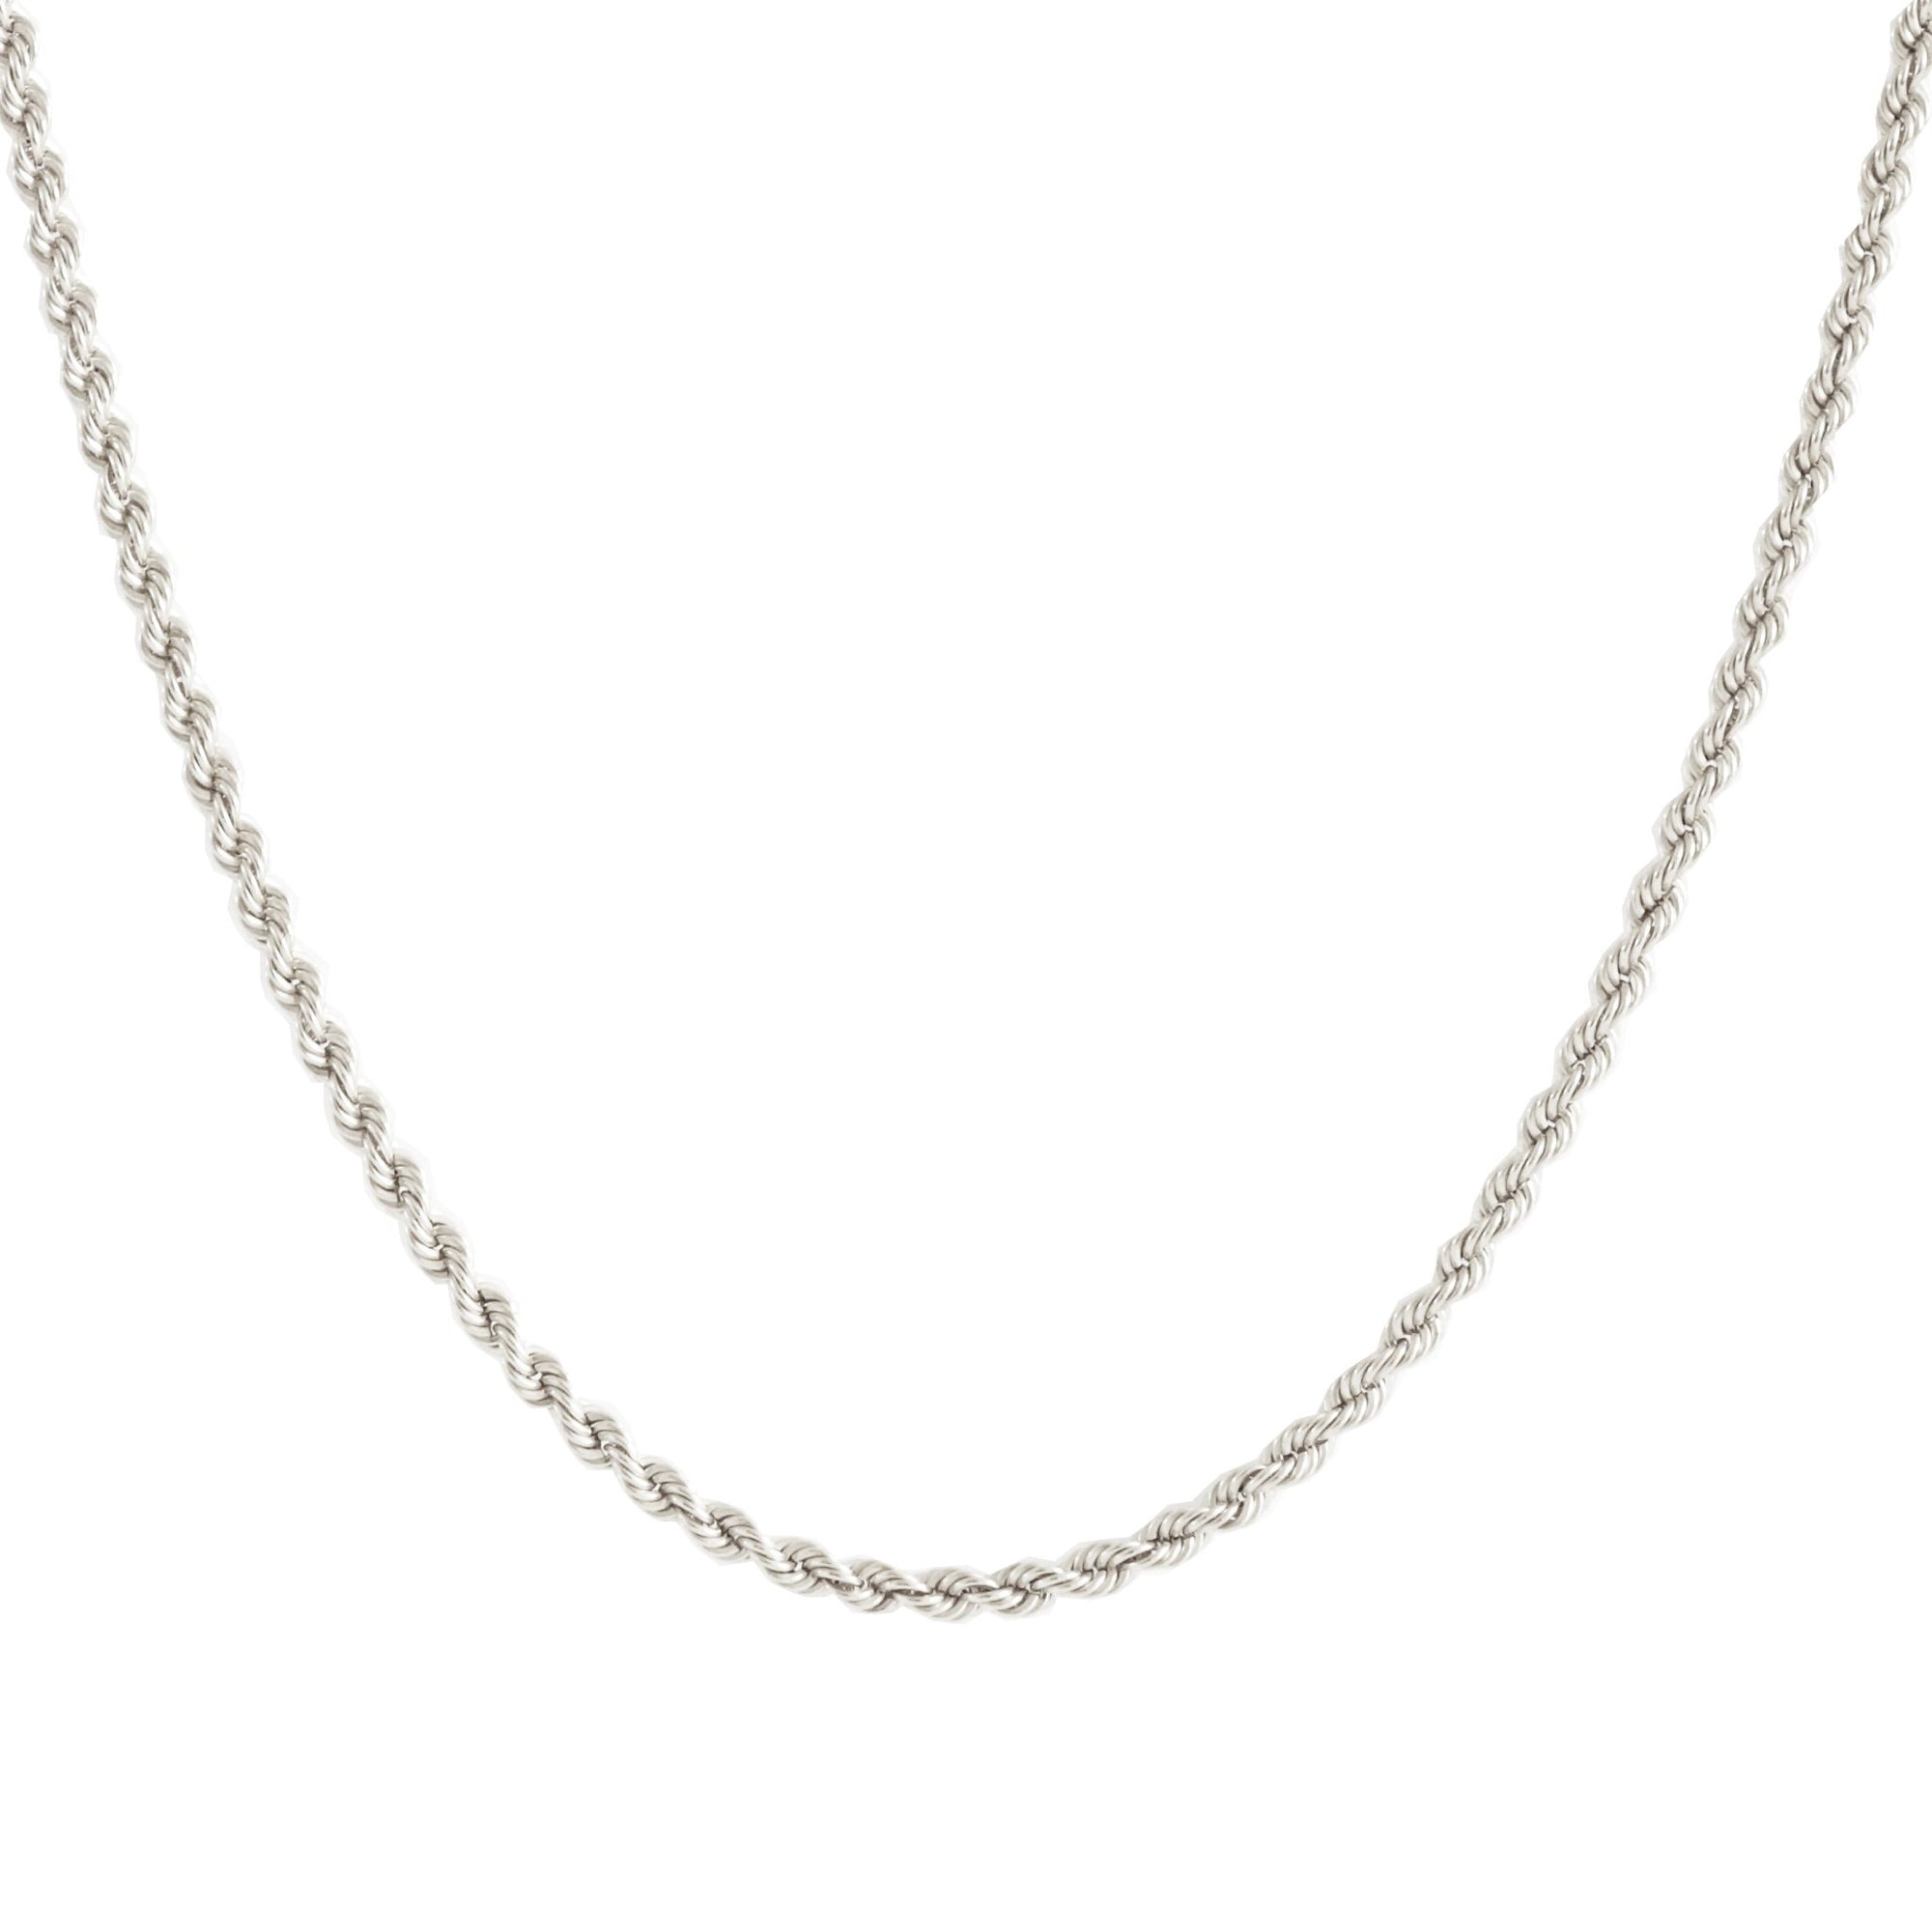 POISE TWISTED ROPE CHAIN 15-17" NECKLACE SILVER - SO PRETTY CARA COTTER